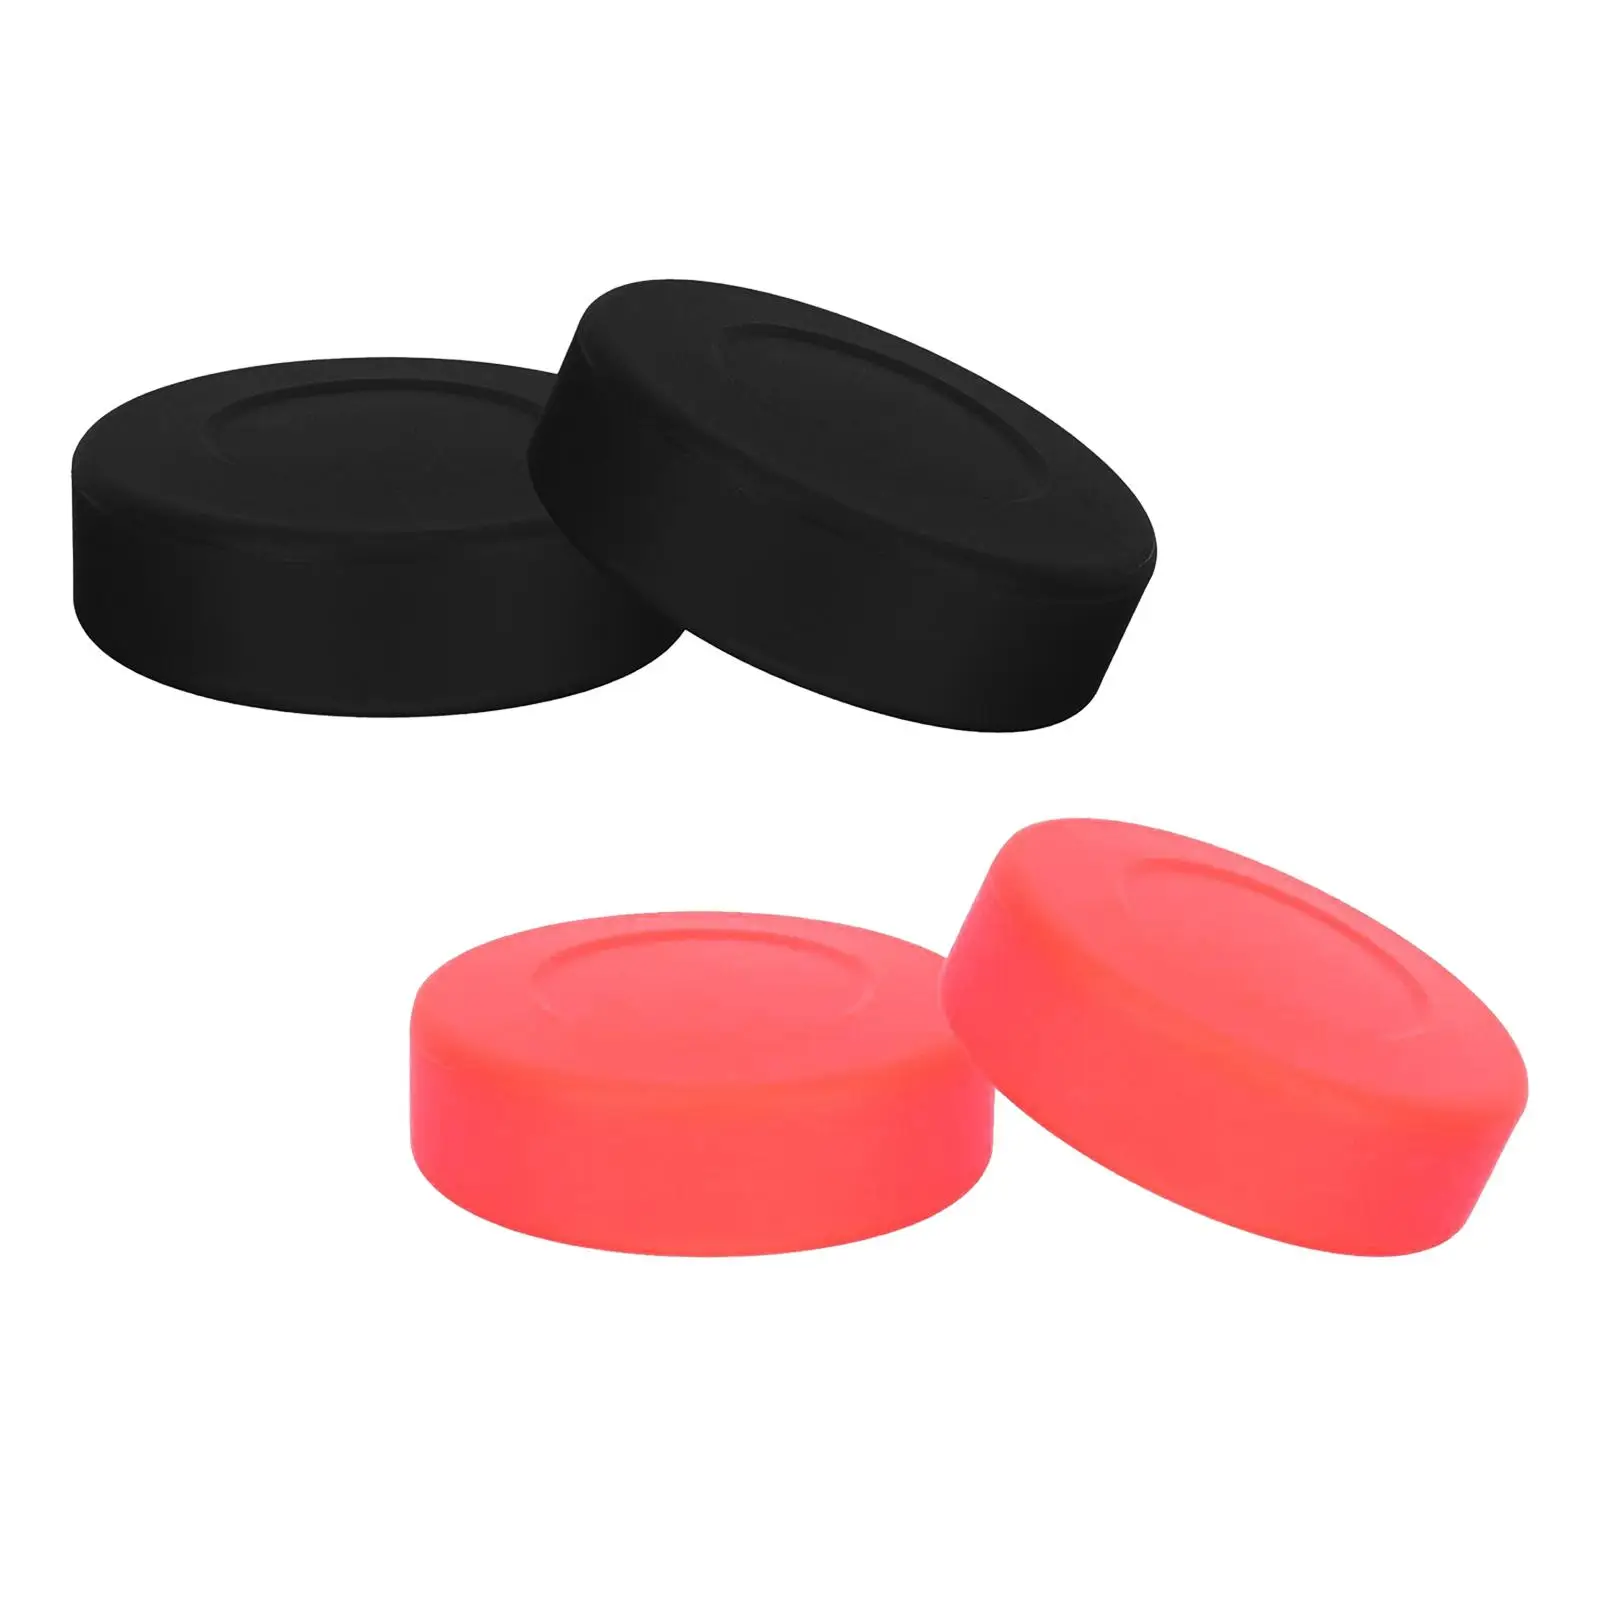 2 Pieces Ice Hockey Puck Ice Hockey Accessories Portable Durable Multipurpose for Kids Teenagers Beginners Adults Competition